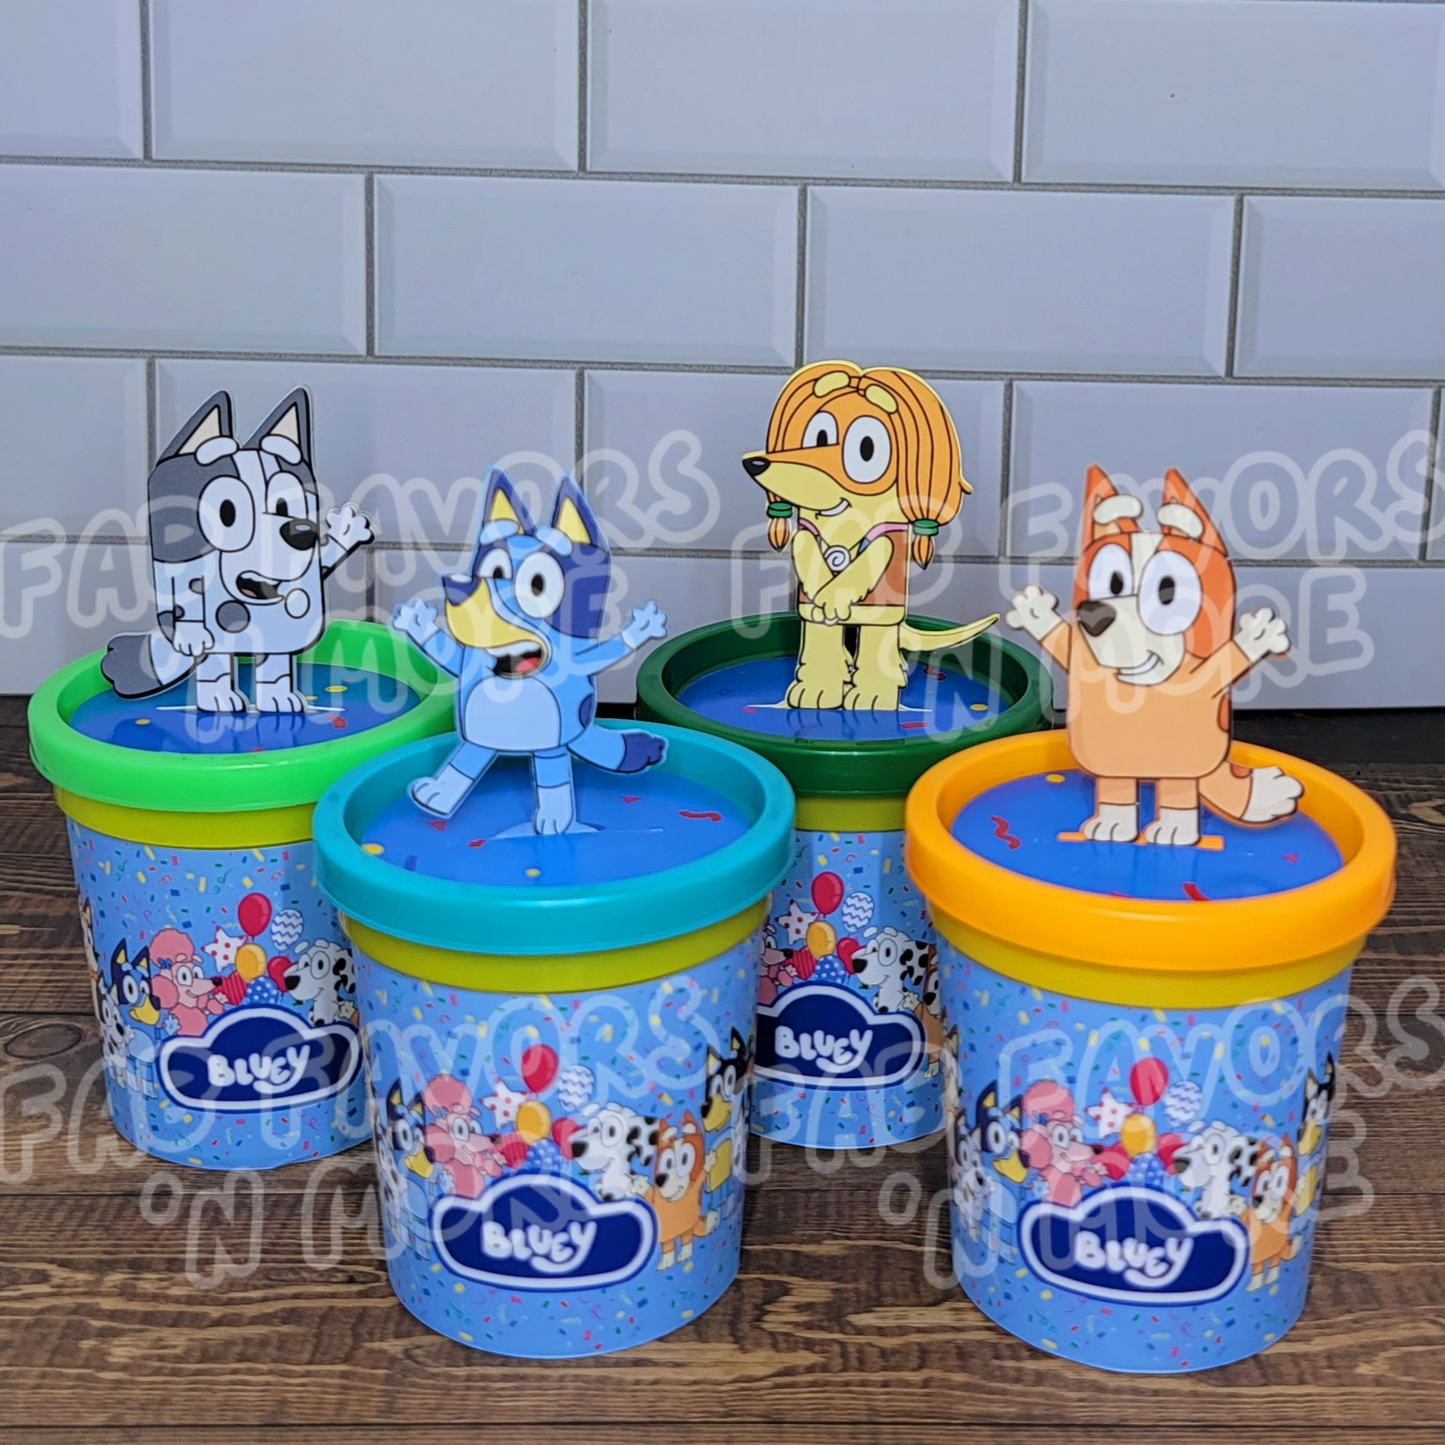 Bluey Party Favors Playdoh Party Favors